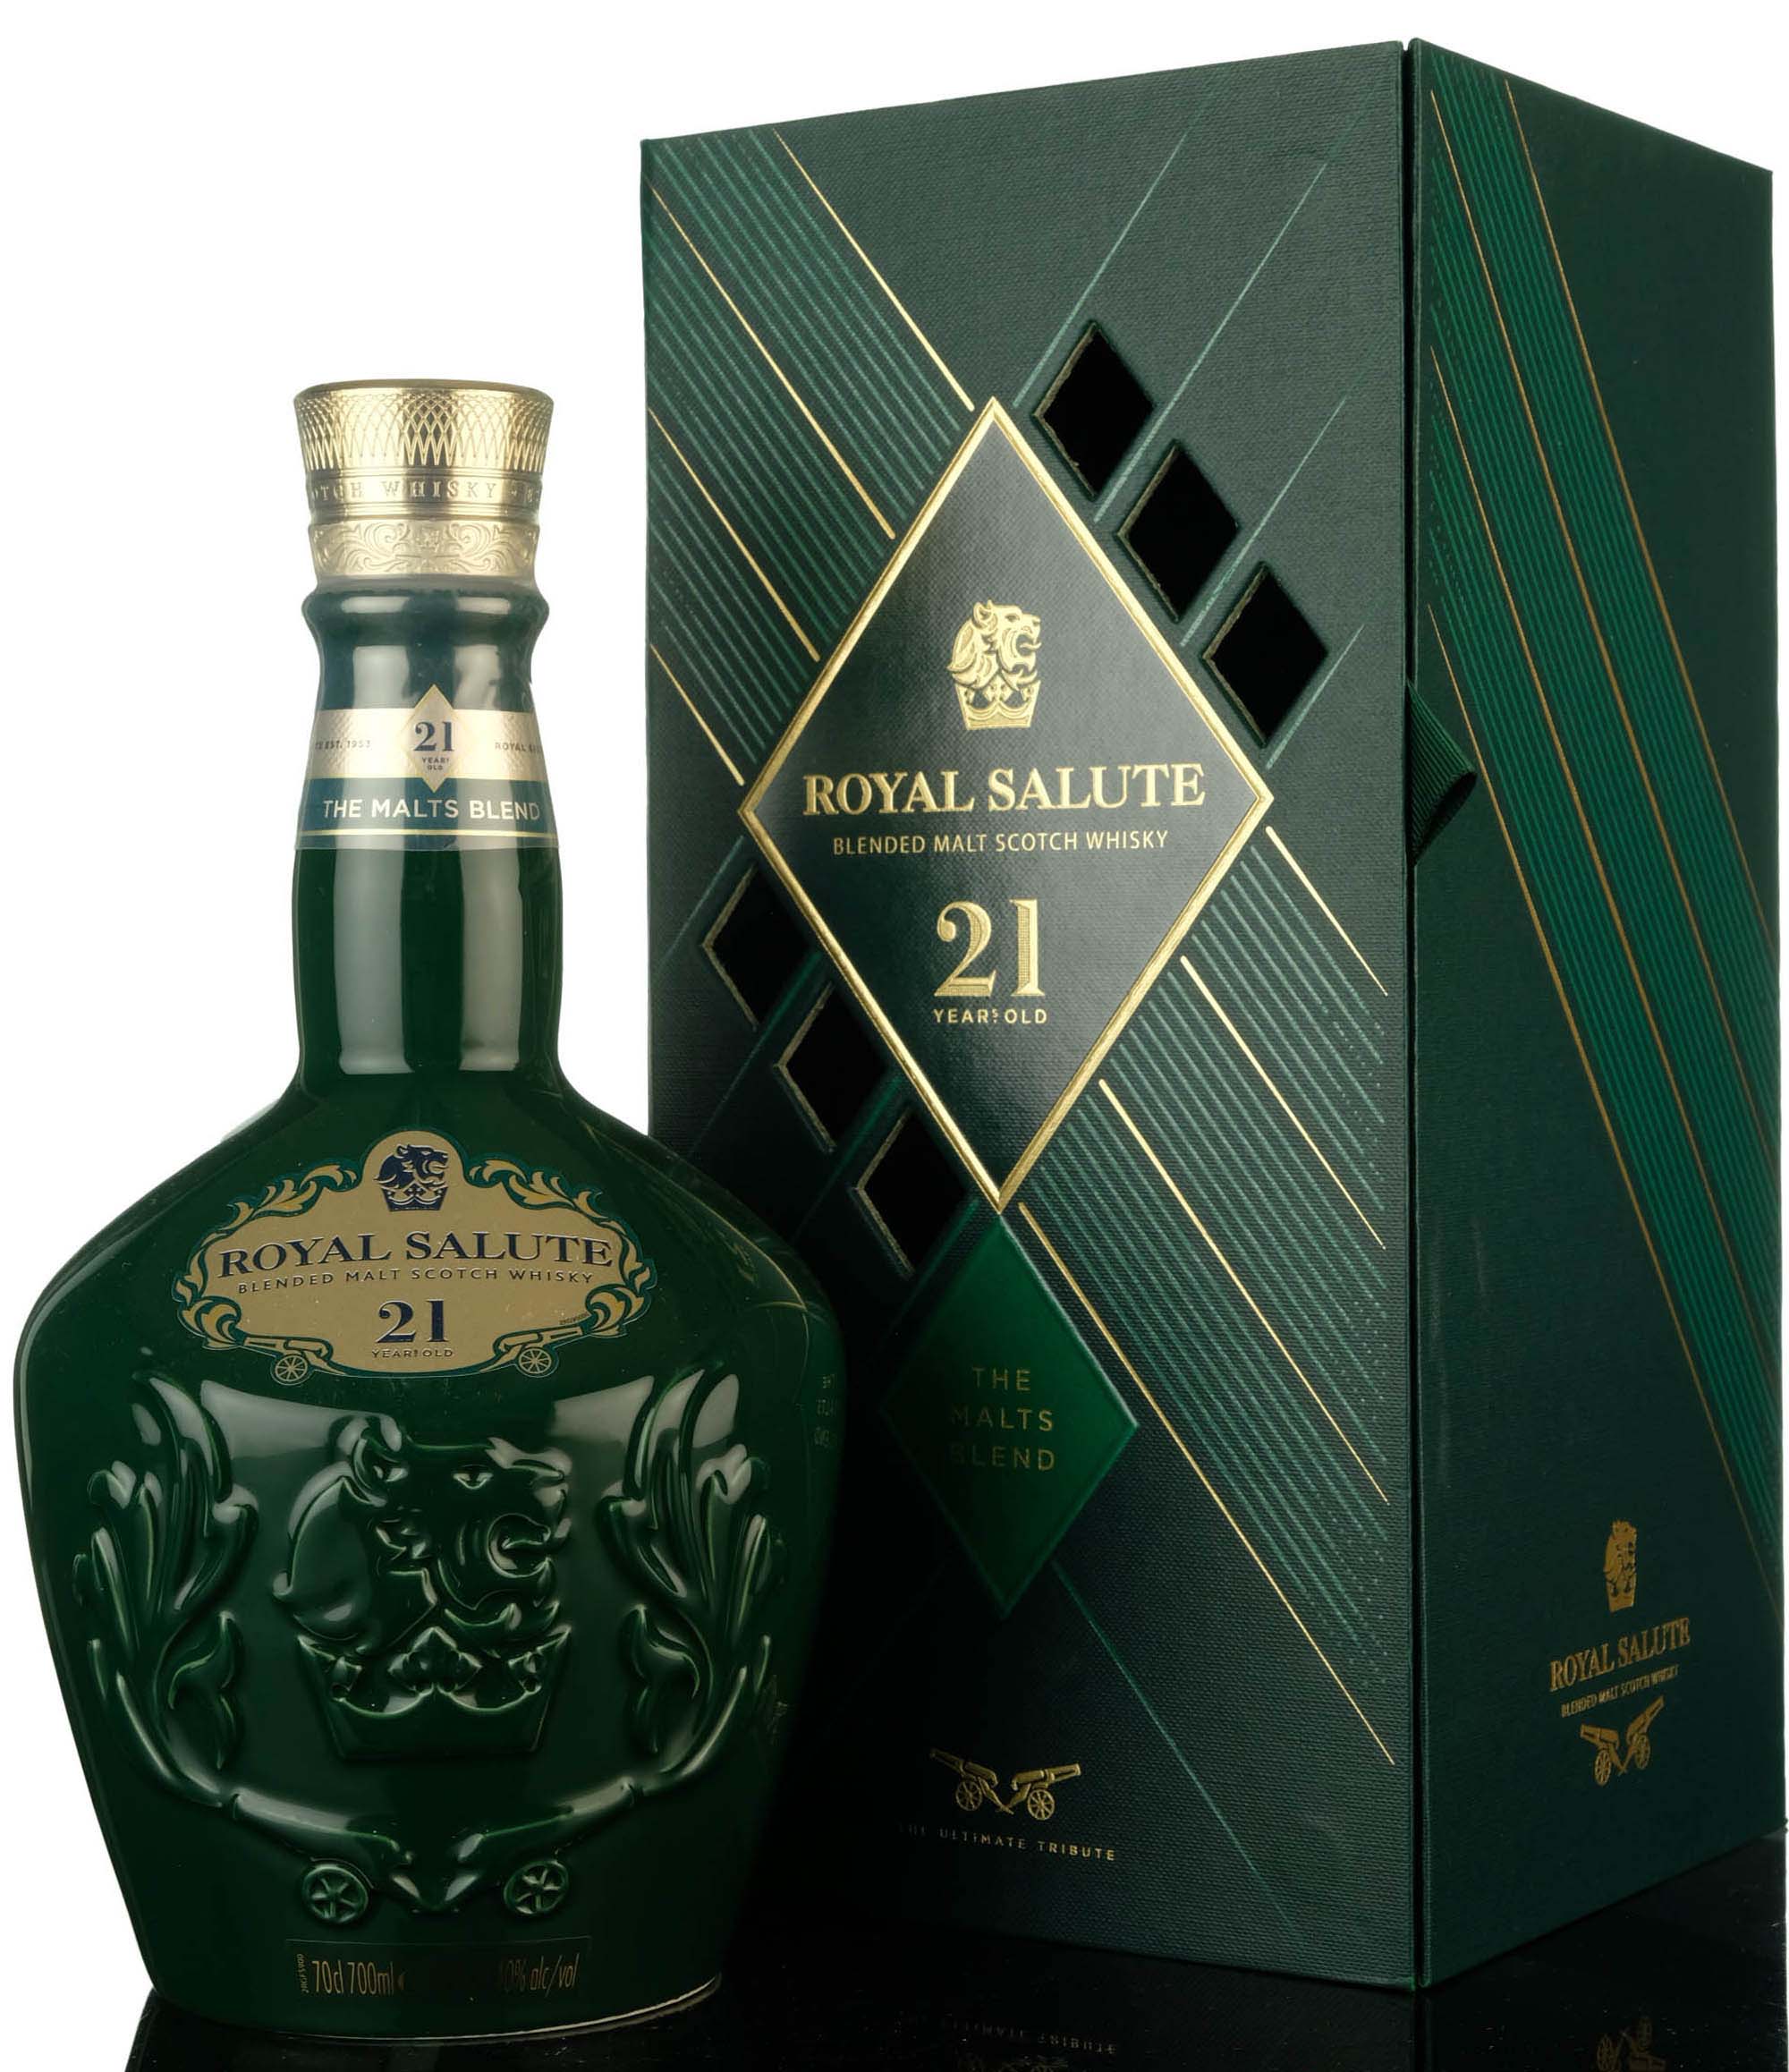 Royal Salute 21 Year Old - The Malts Blend - Green Ceramic - 2022 Release